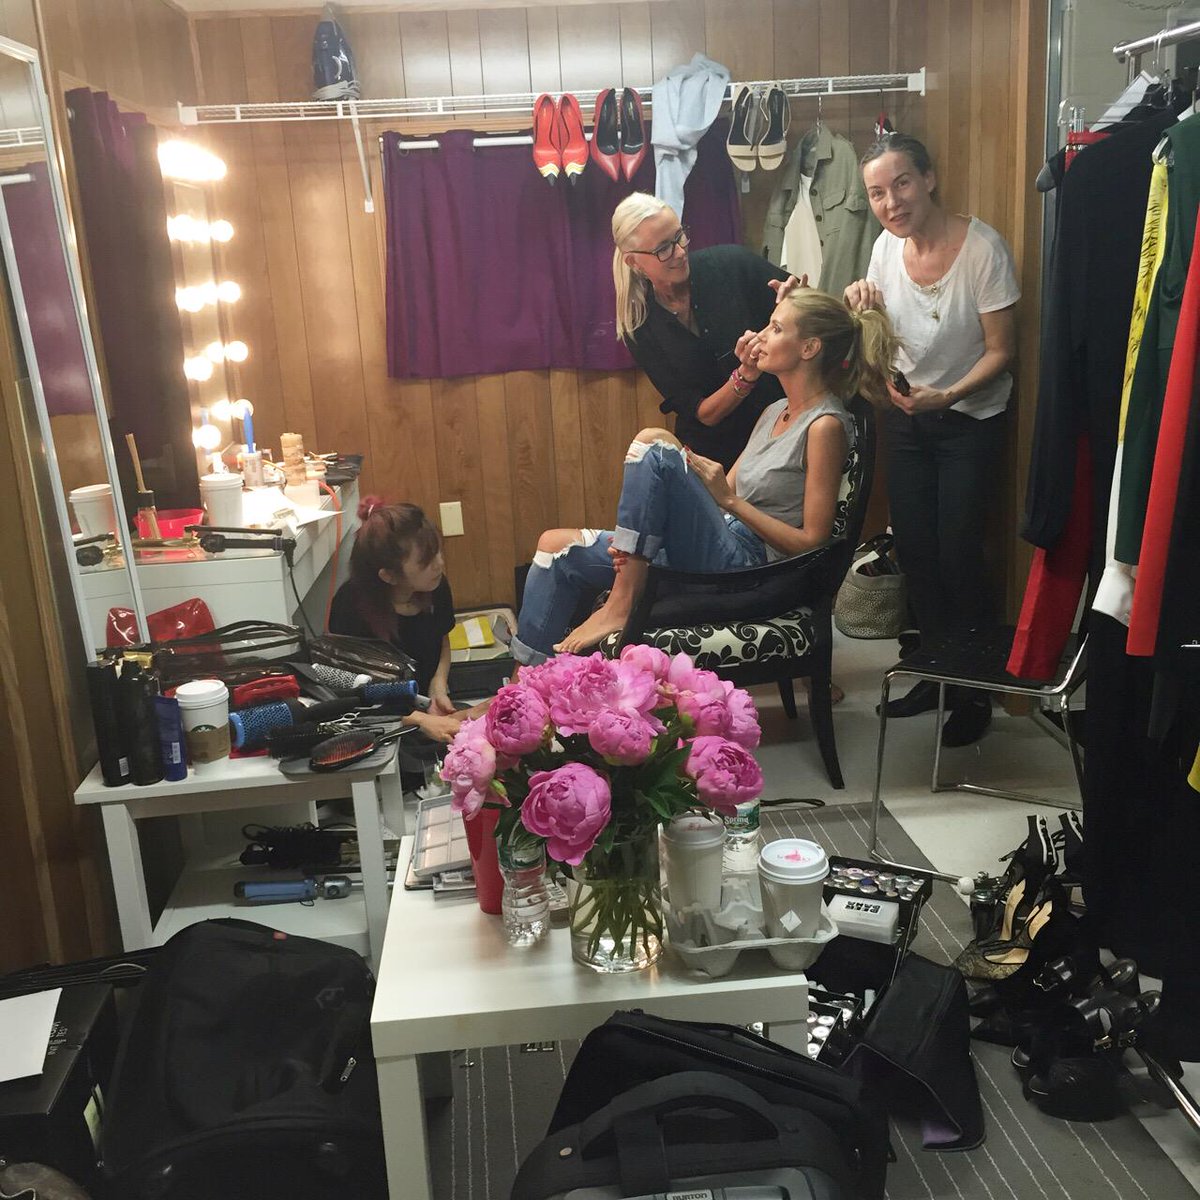 Welcome to my trailer @ProjectRunway!  #BTS  See what we’ve been cooking up for you 8/6 on @lifetimetv http://t.co/toohXDyGt6